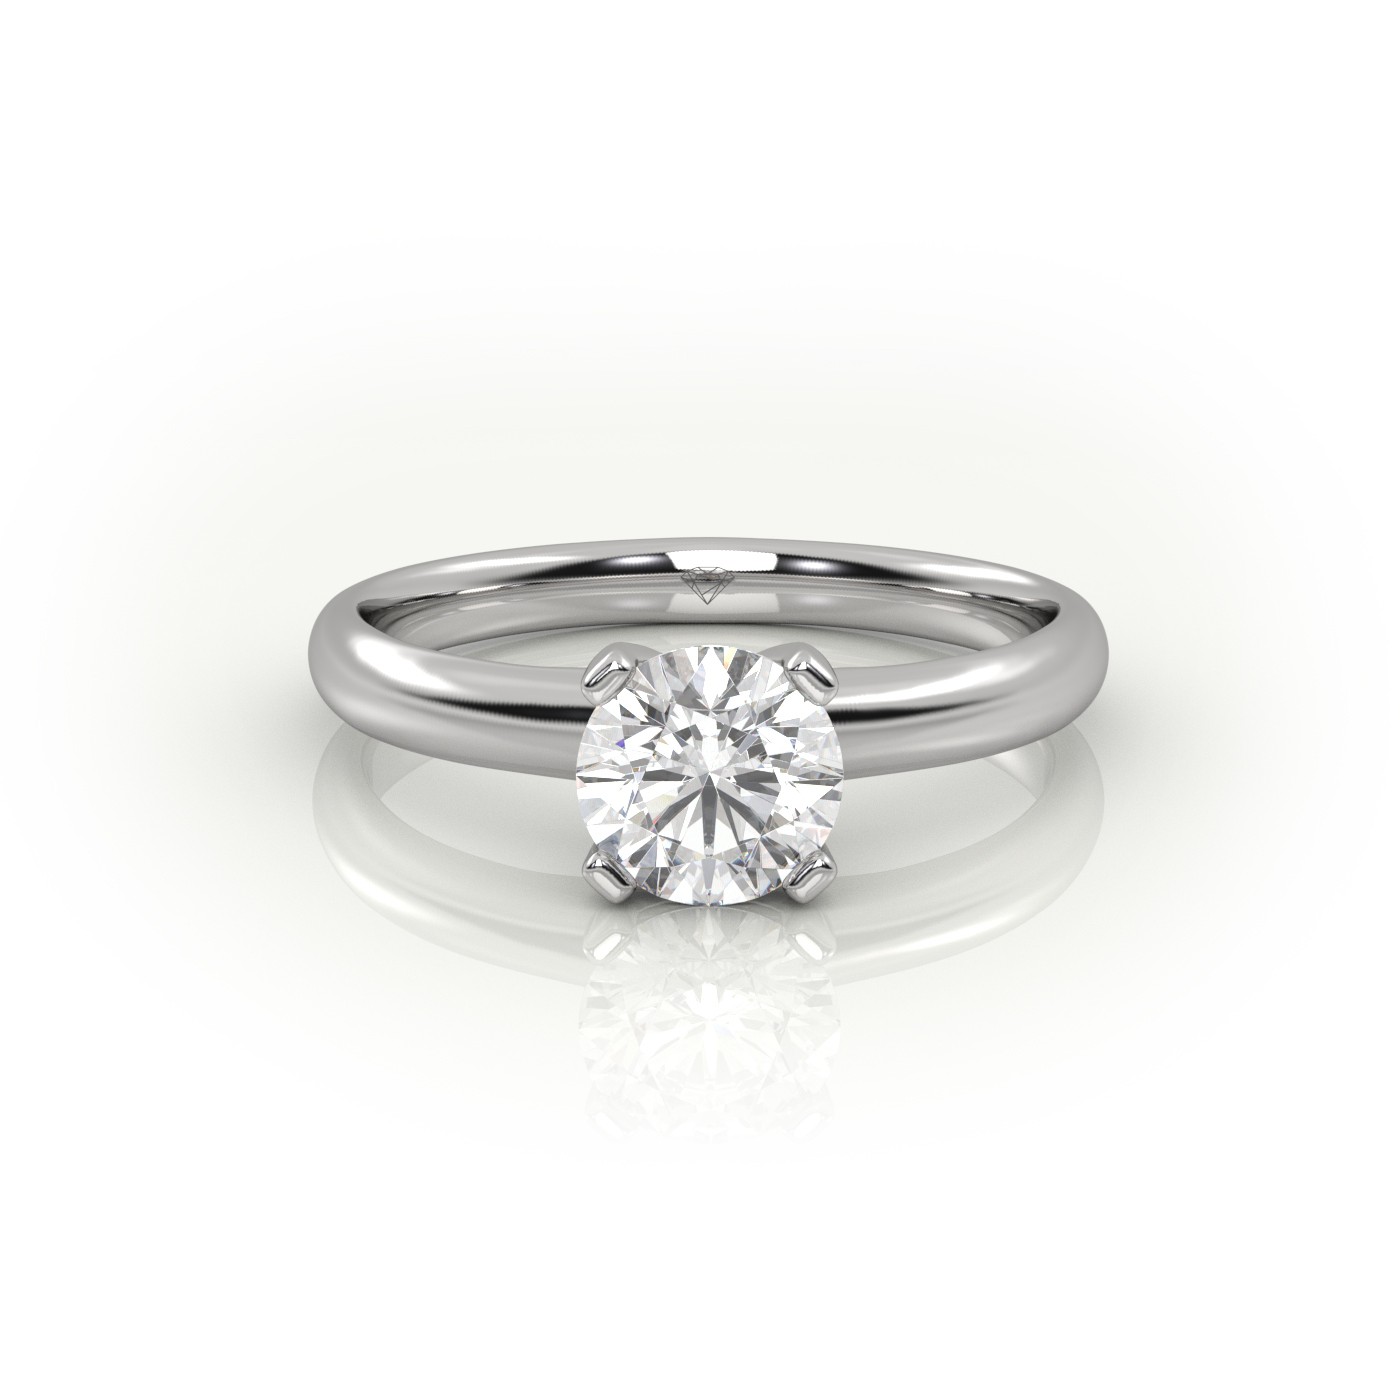 18K WHITE GOLD ROUND CUT 4 PRONGS SOLITAIRE ENGAGEMENT RING